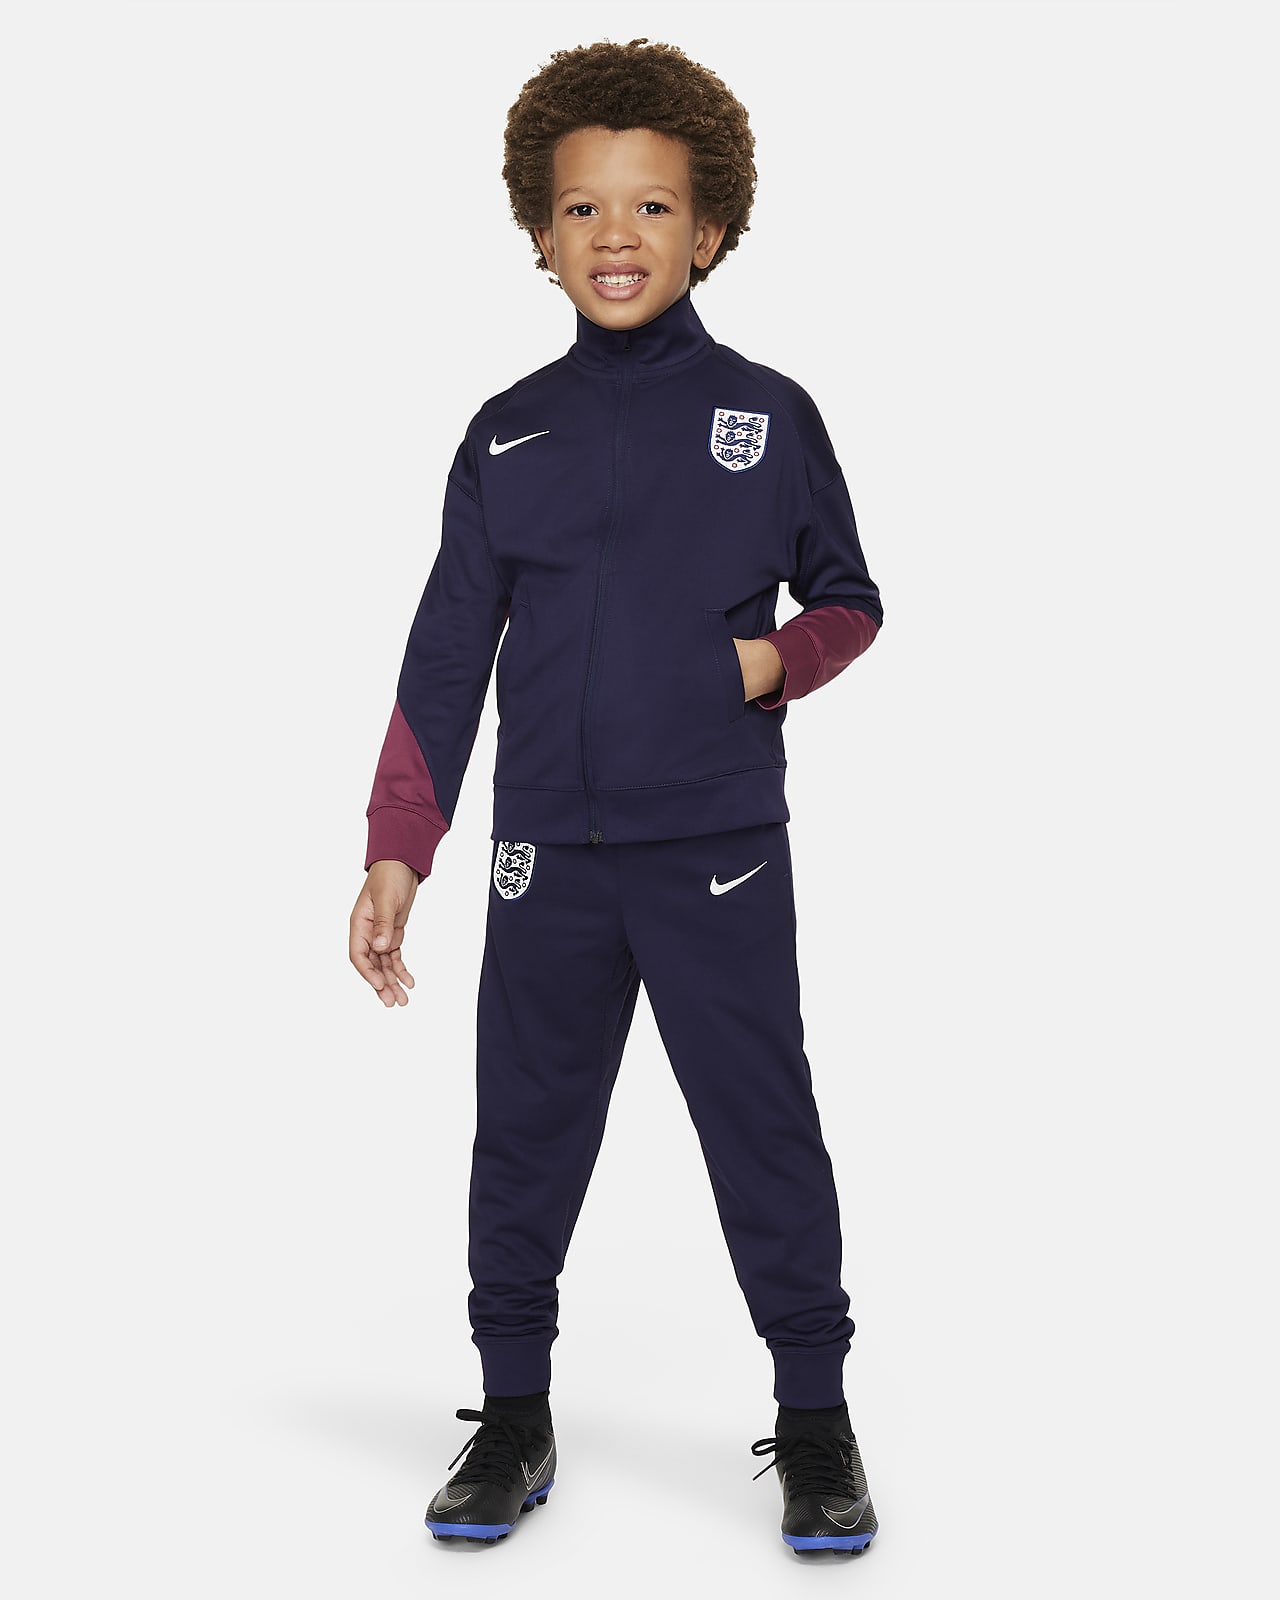 England Strike Younger Kids' Nike Dri-FIT Football Knit Tracksuit